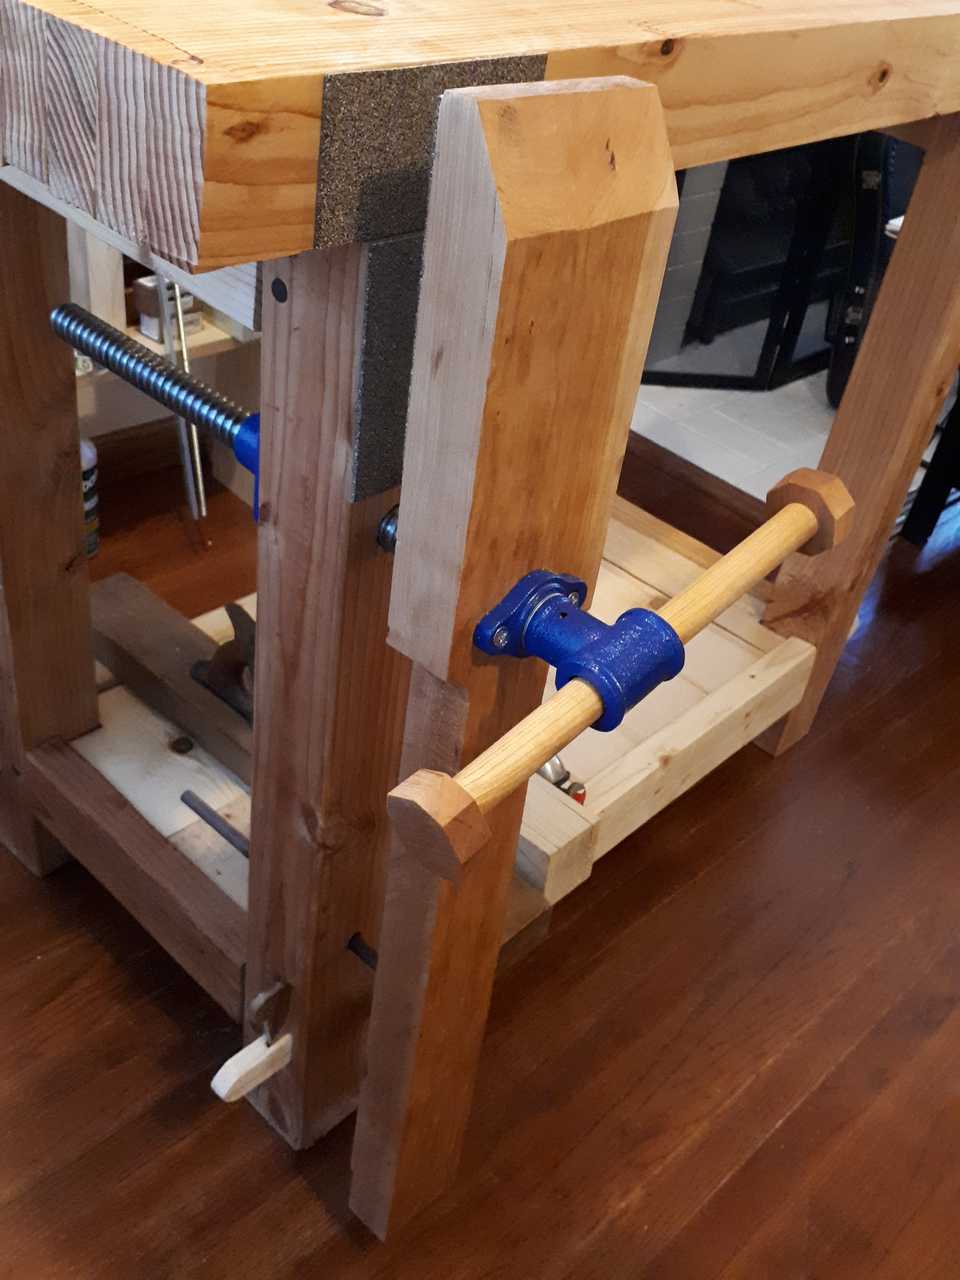 Dowel at the bottom of the vise